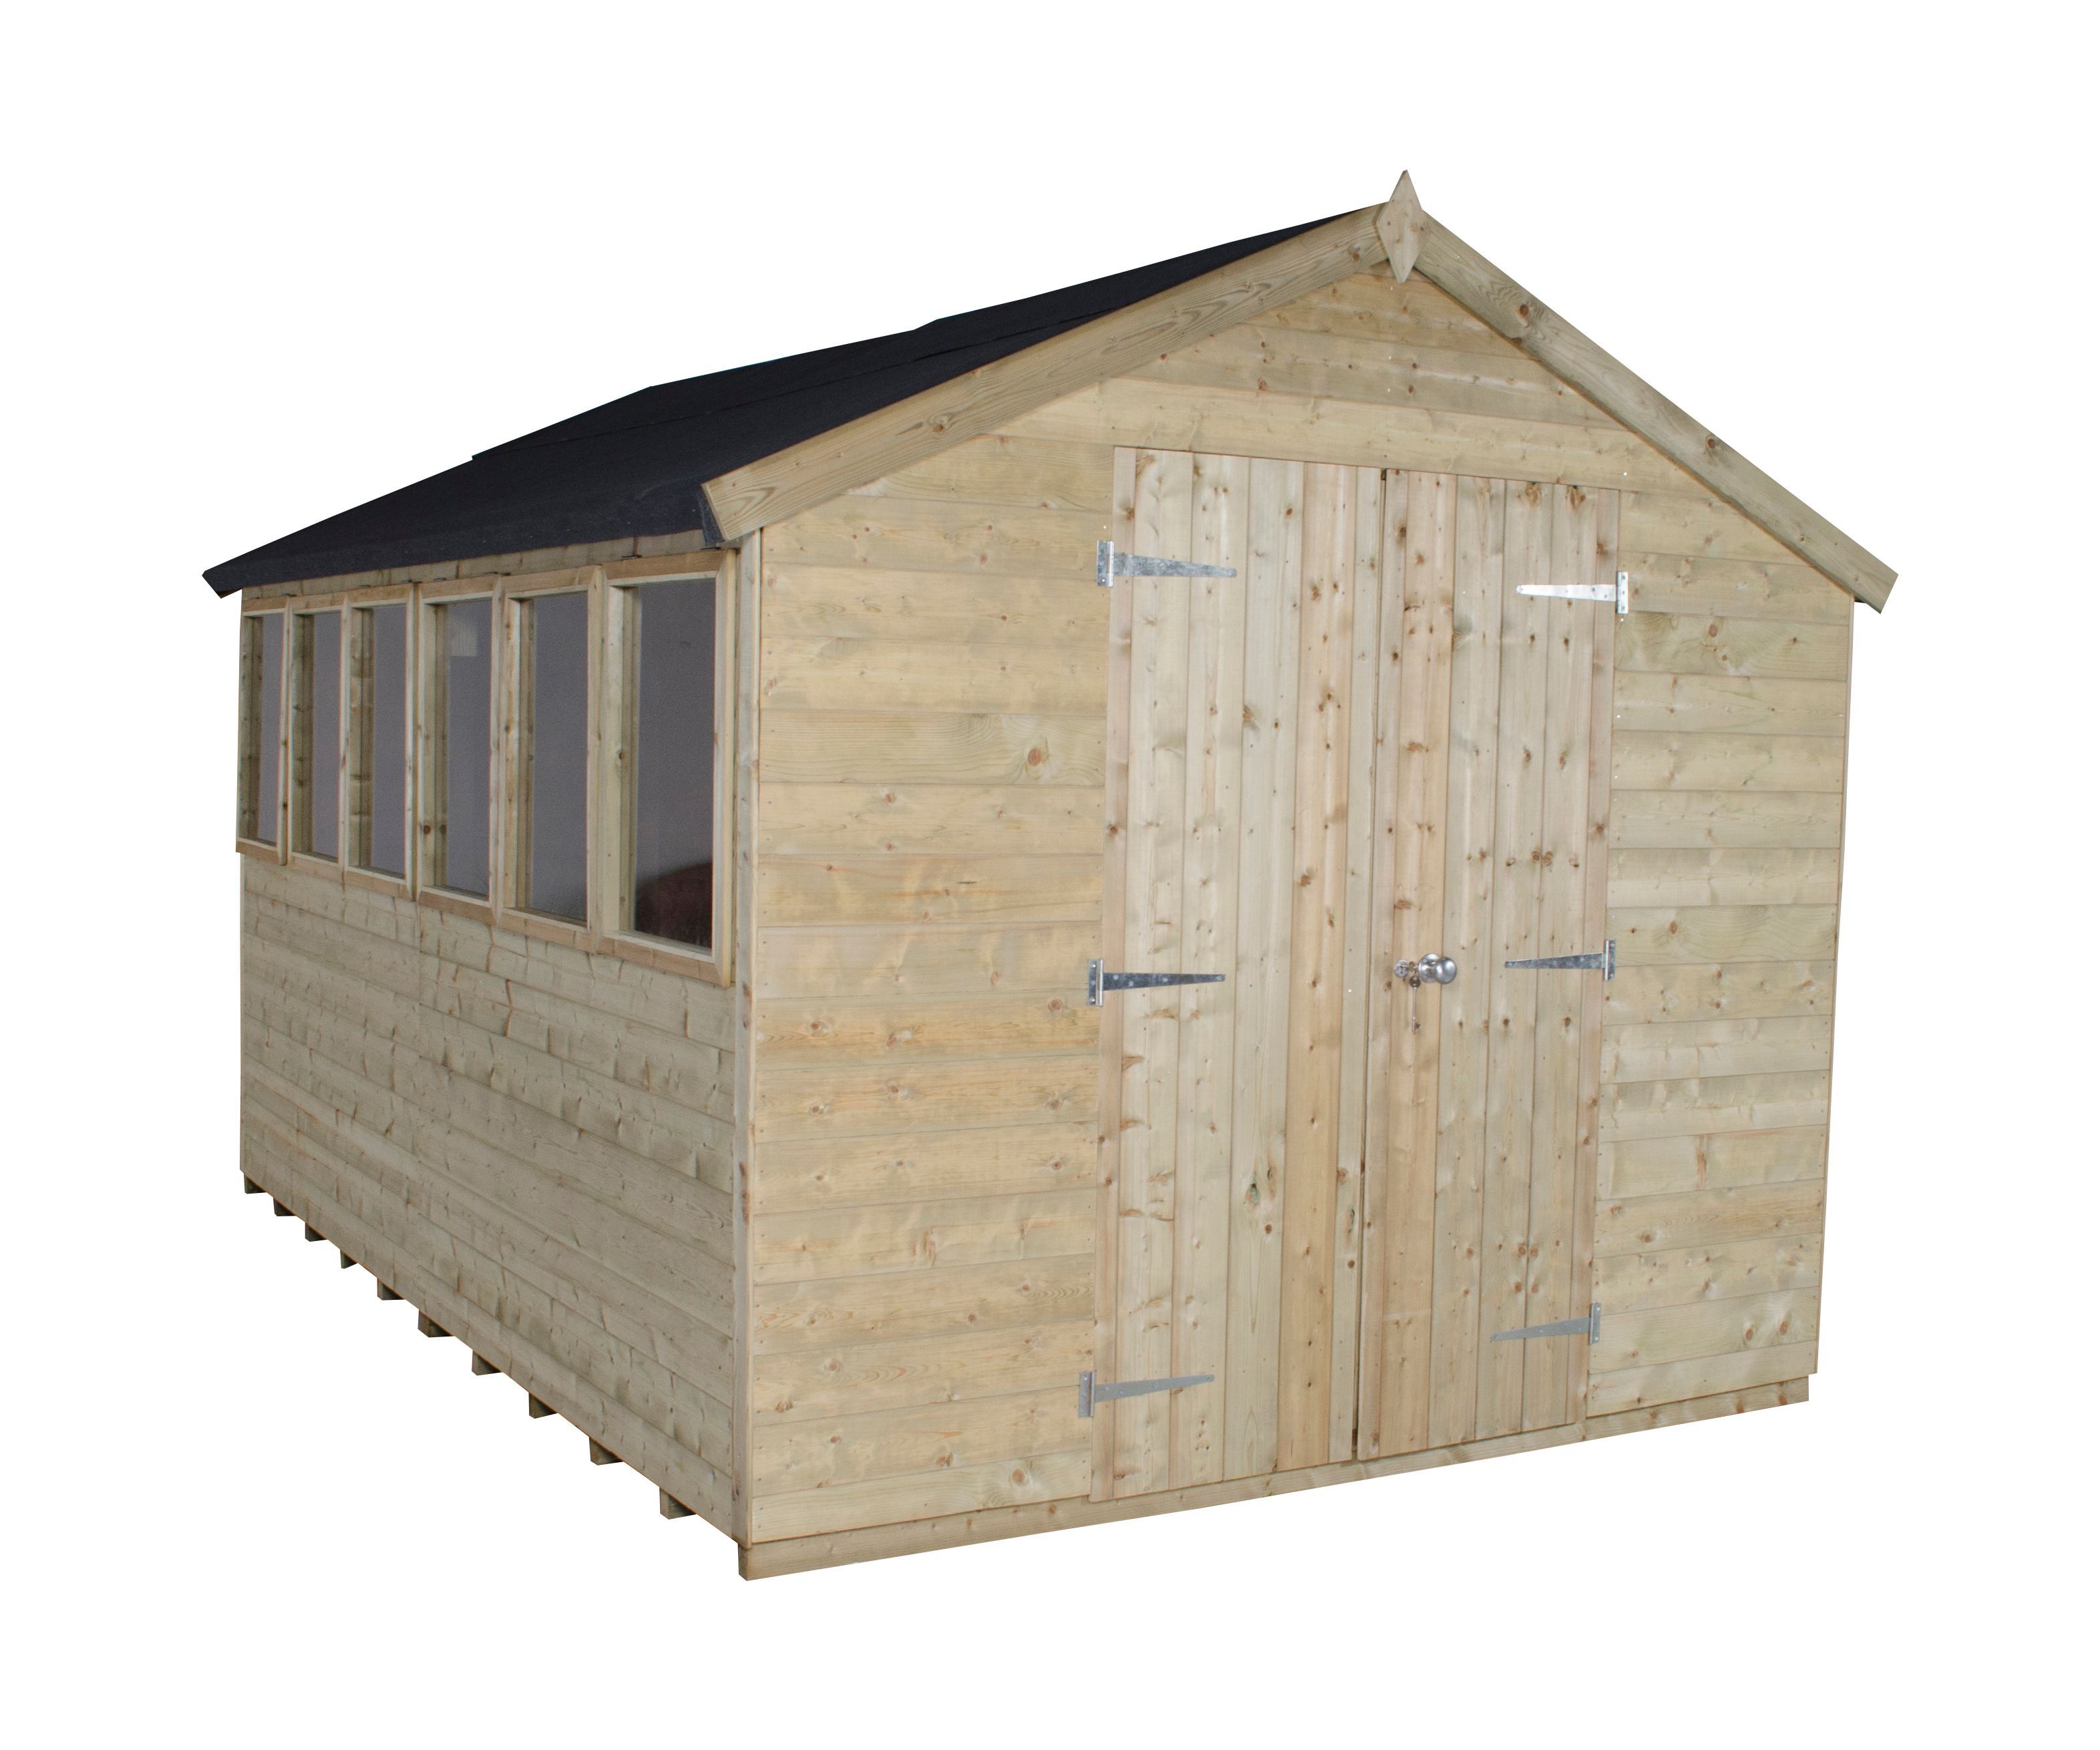 Forest Garden 12x8 Apex Shed - Base not includedAssembly service included